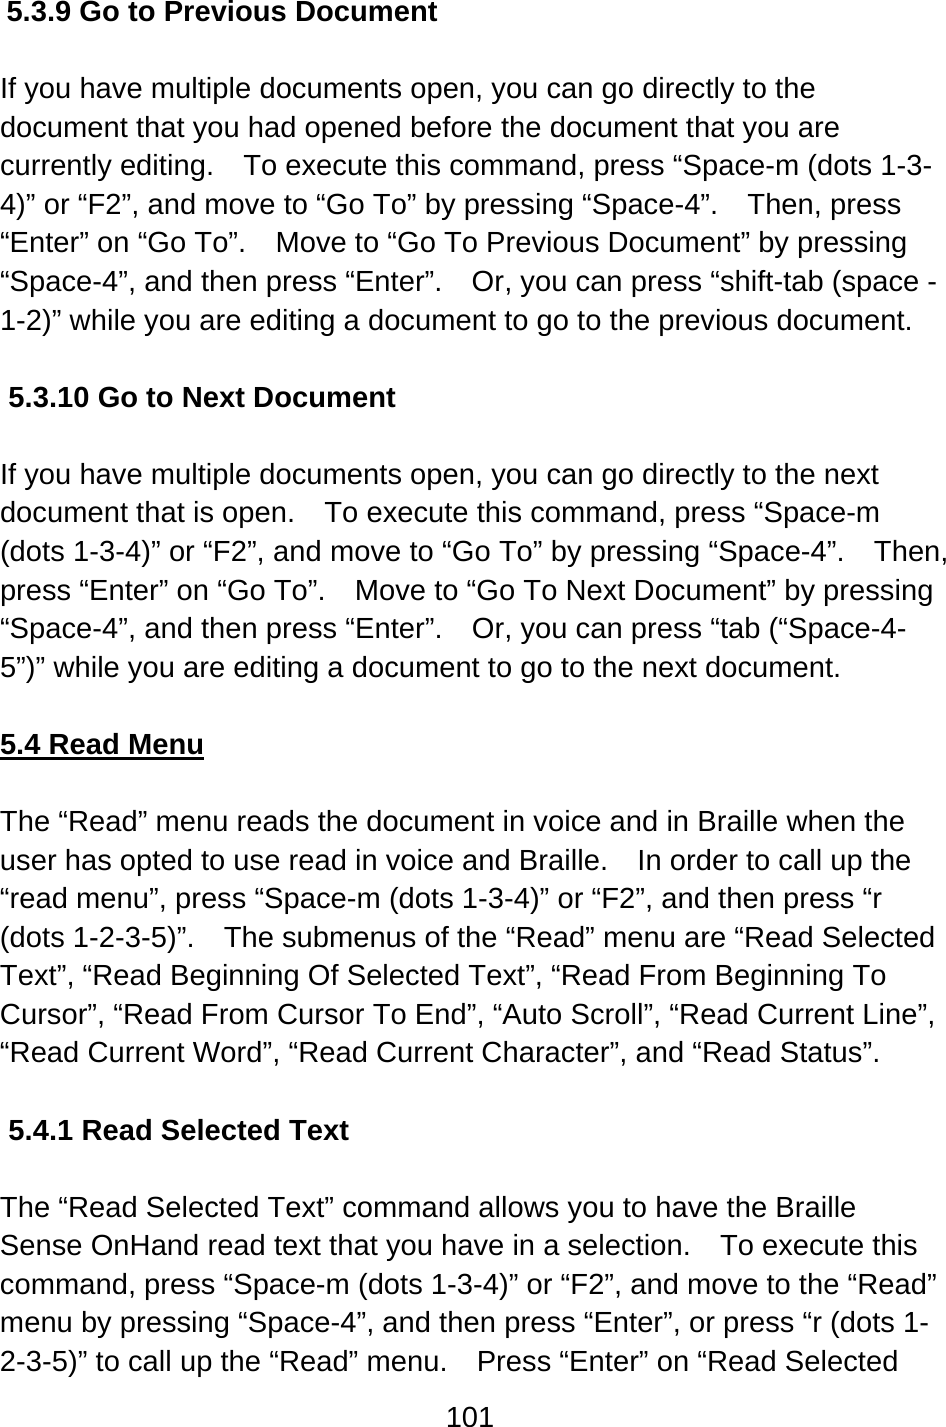 101  5.3.9 Go to Previous Document  If you have multiple documents open, you can go directly to the document that you had opened before the document that you are currently editing.    To execute this command, press “Space-m (dots 1-3-4)” or “F2”, and move to “Go To” by pressing “Space-4”.    Then, press “Enter” on “Go To”.    Move to “Go To Previous Document” by pressing “Space-4”, and then press “Enter”.    Or, you can press “shift-tab (space -1-2)” while you are editing a document to go to the previous document.  5.3.10 Go to Next Document  If you have multiple documents open, you can go directly to the next document that is open.    To execute this command, press “Space-m (dots 1-3-4)” or “F2”, and move to “Go To” by pressing “Space-4”.    Then, press “Enter” on “Go To”.    Move to “Go To Next Document” by pressing “Space-4”, and then press “Enter”.    Or, you can press “tab (“Space-4-5”)” while you are editing a document to go to the next document.  5.4 Read Menu  The “Read” menu reads the document in voice and in Braille when the user has opted to use read in voice and Braille.    In order to call up the “read menu”, press “Space-m (dots 1-3-4)” or “F2”, and then press “r (dots 1-2-3-5)”.  The submenus of the “Read” menu are “Read Selected Text”, “Read Beginning Of Selected Text”, “Read From Beginning To Cursor”, “Read From Cursor To End”, “Auto Scroll”, “Read Current Line”, “Read Current Word”, “Read Current Character”, and “Read Status”.  5.4.1 Read Selected Text  The “Read Selected Text” command allows you to have the Braille Sense OnHand read text that you have in a selection.    To execute this command, press “Space-m (dots 1-3-4)” or “F2”, and move to the “Read” menu by pressing “Space-4”, and then press “Enter”, or press “r (dots 1-2-3-5)” to call up the “Read” menu.    Press “Enter” on “Read Selected 